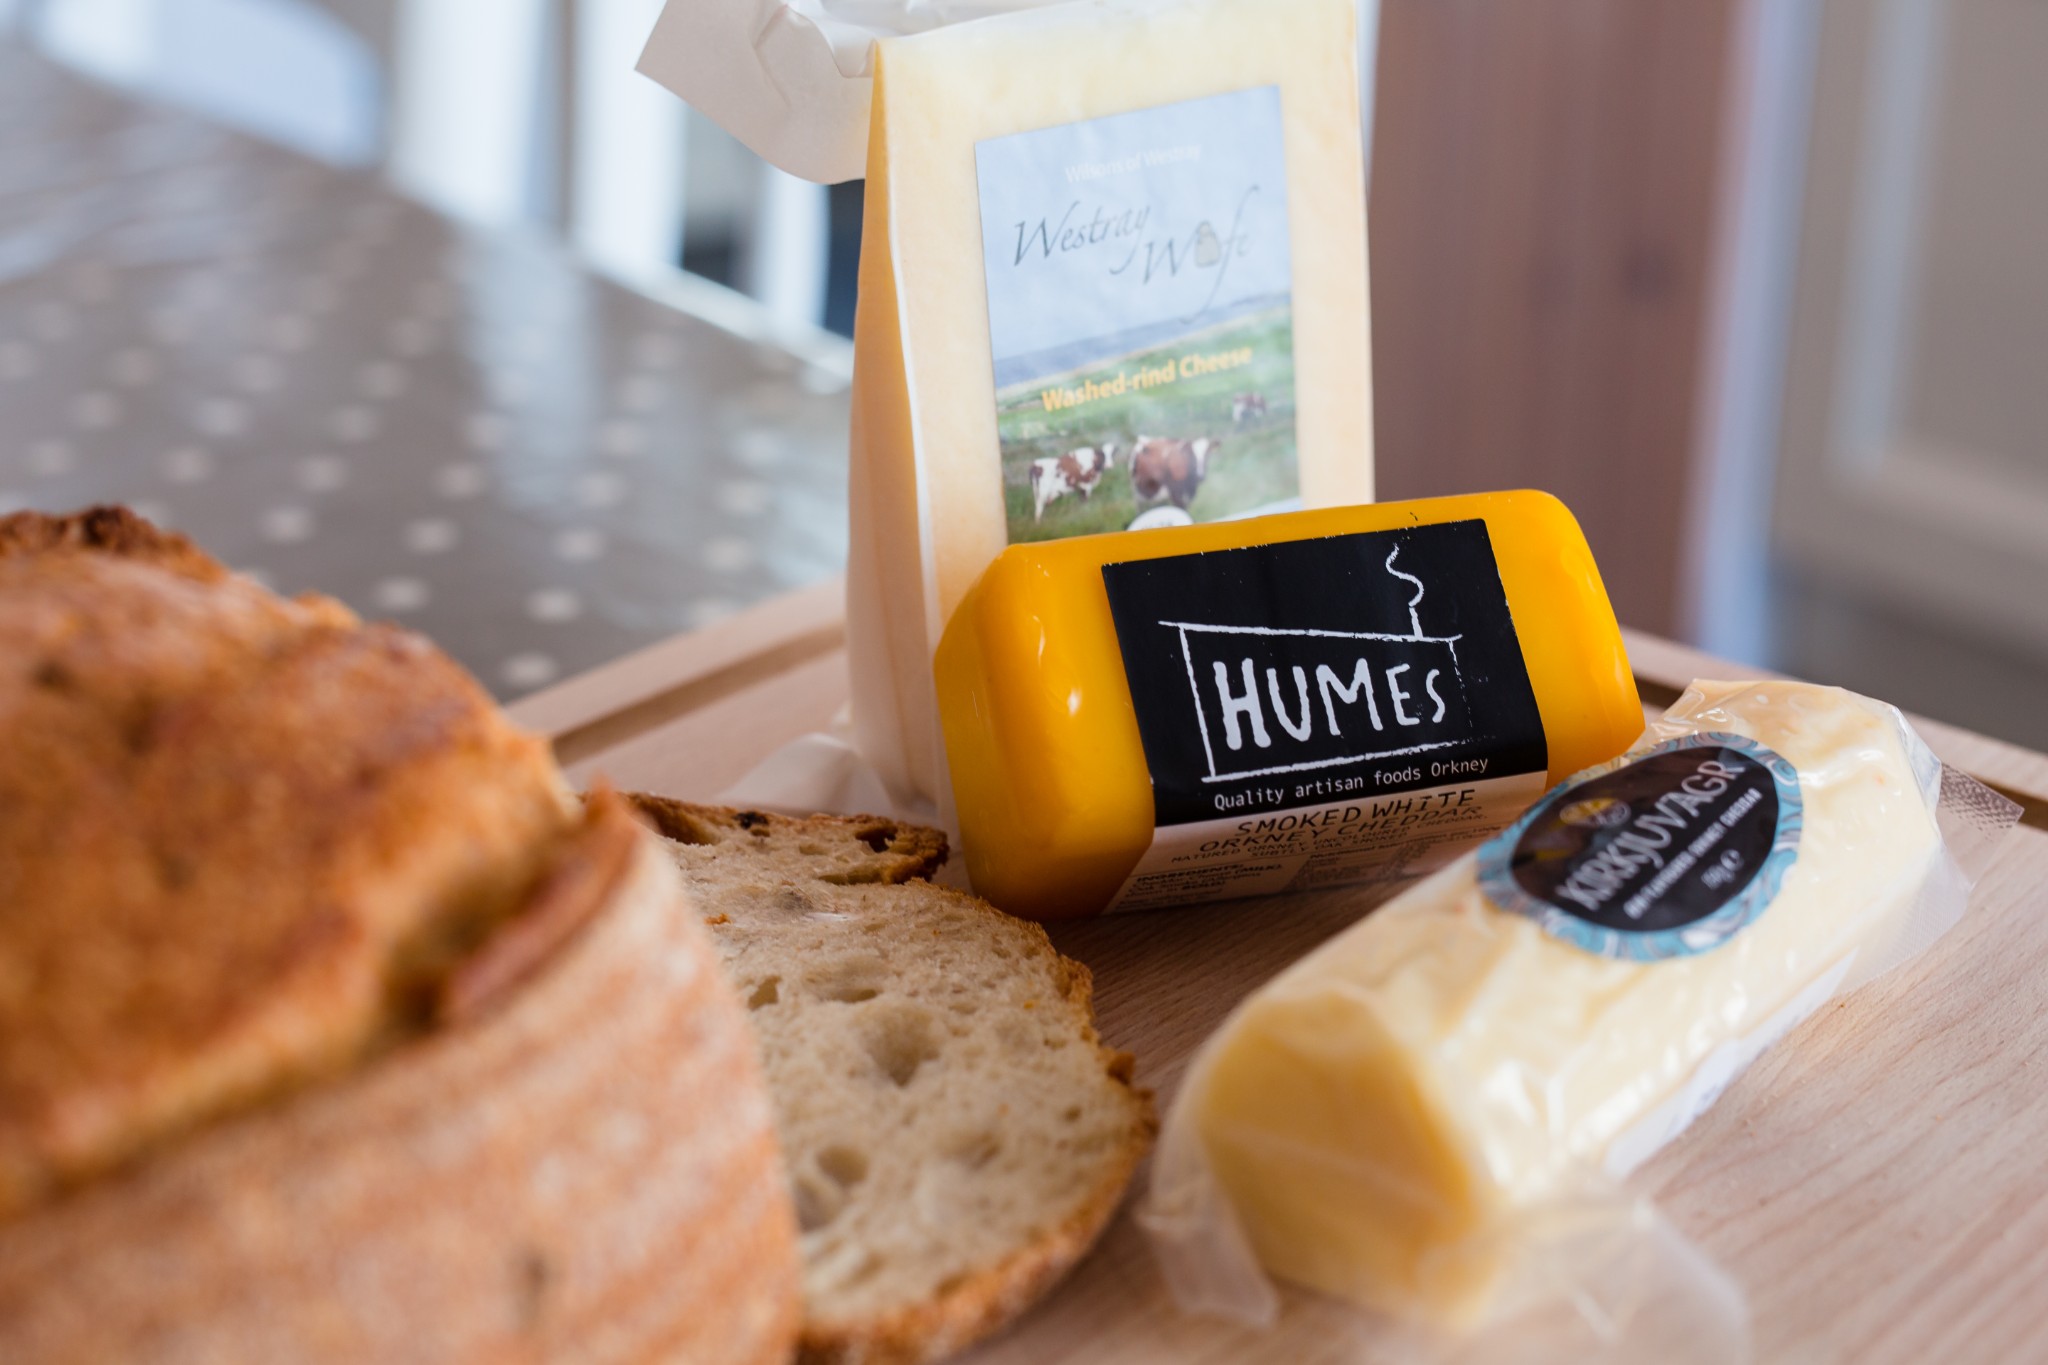 Local cheese and bread available across Orkney